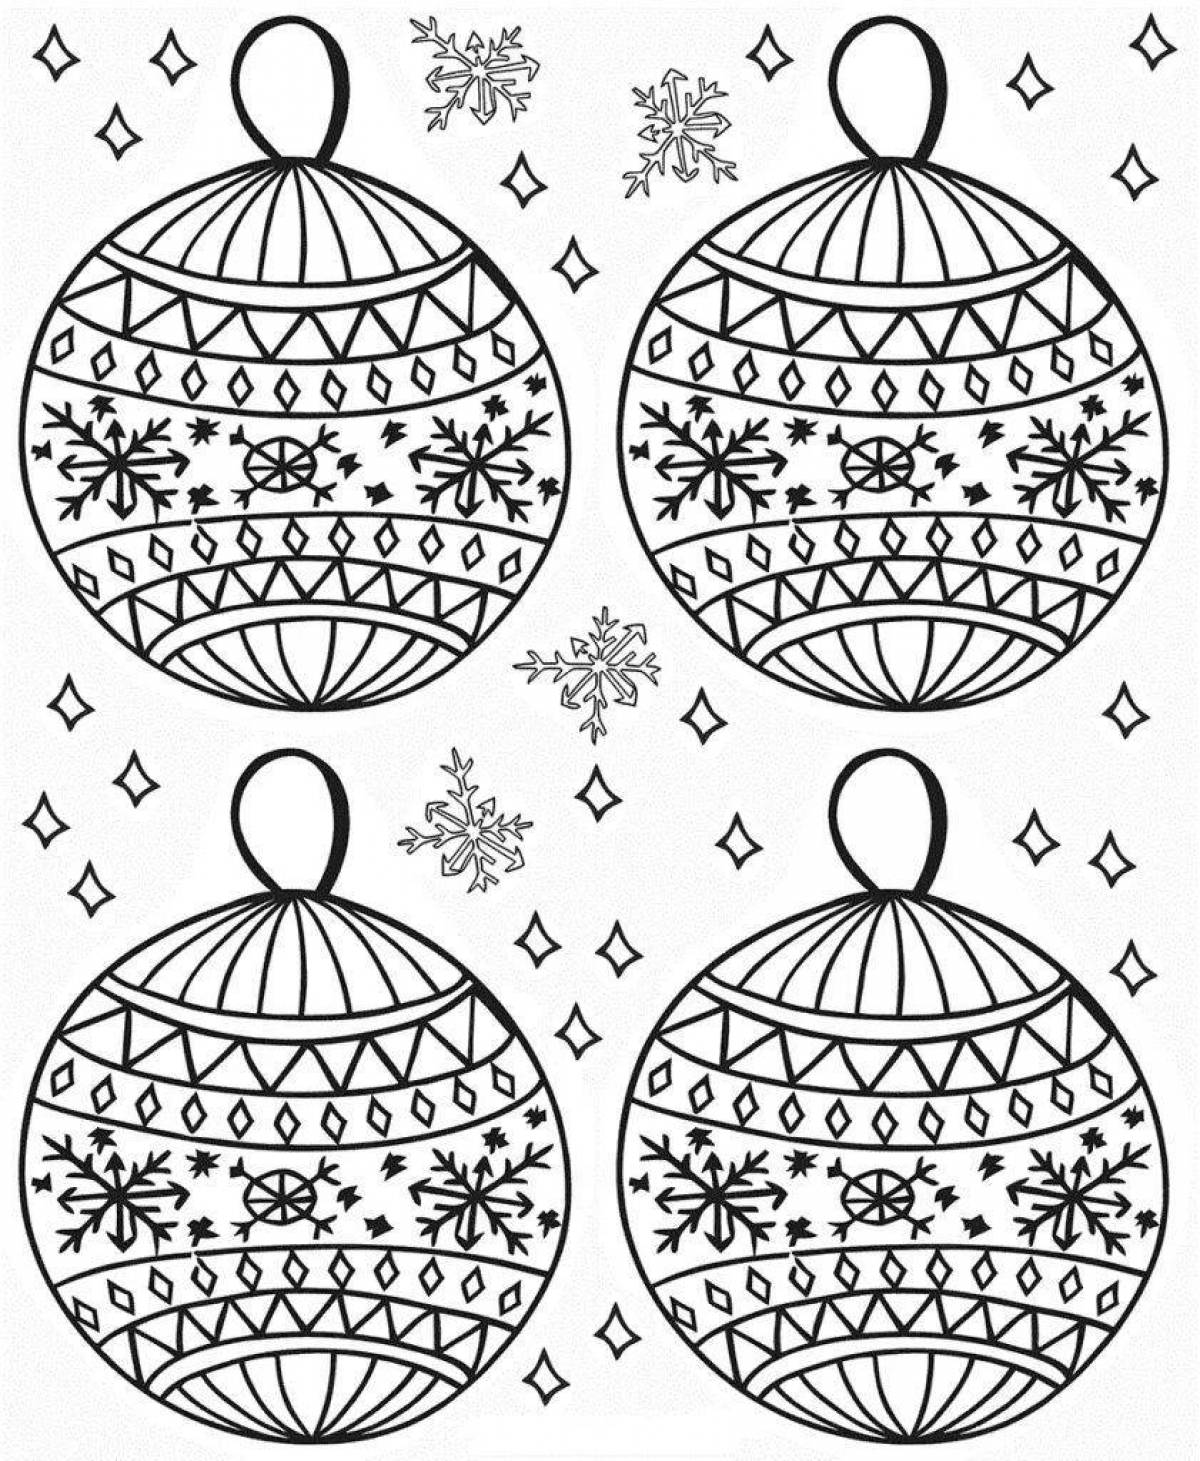 Coloring pages with Christmas patterns